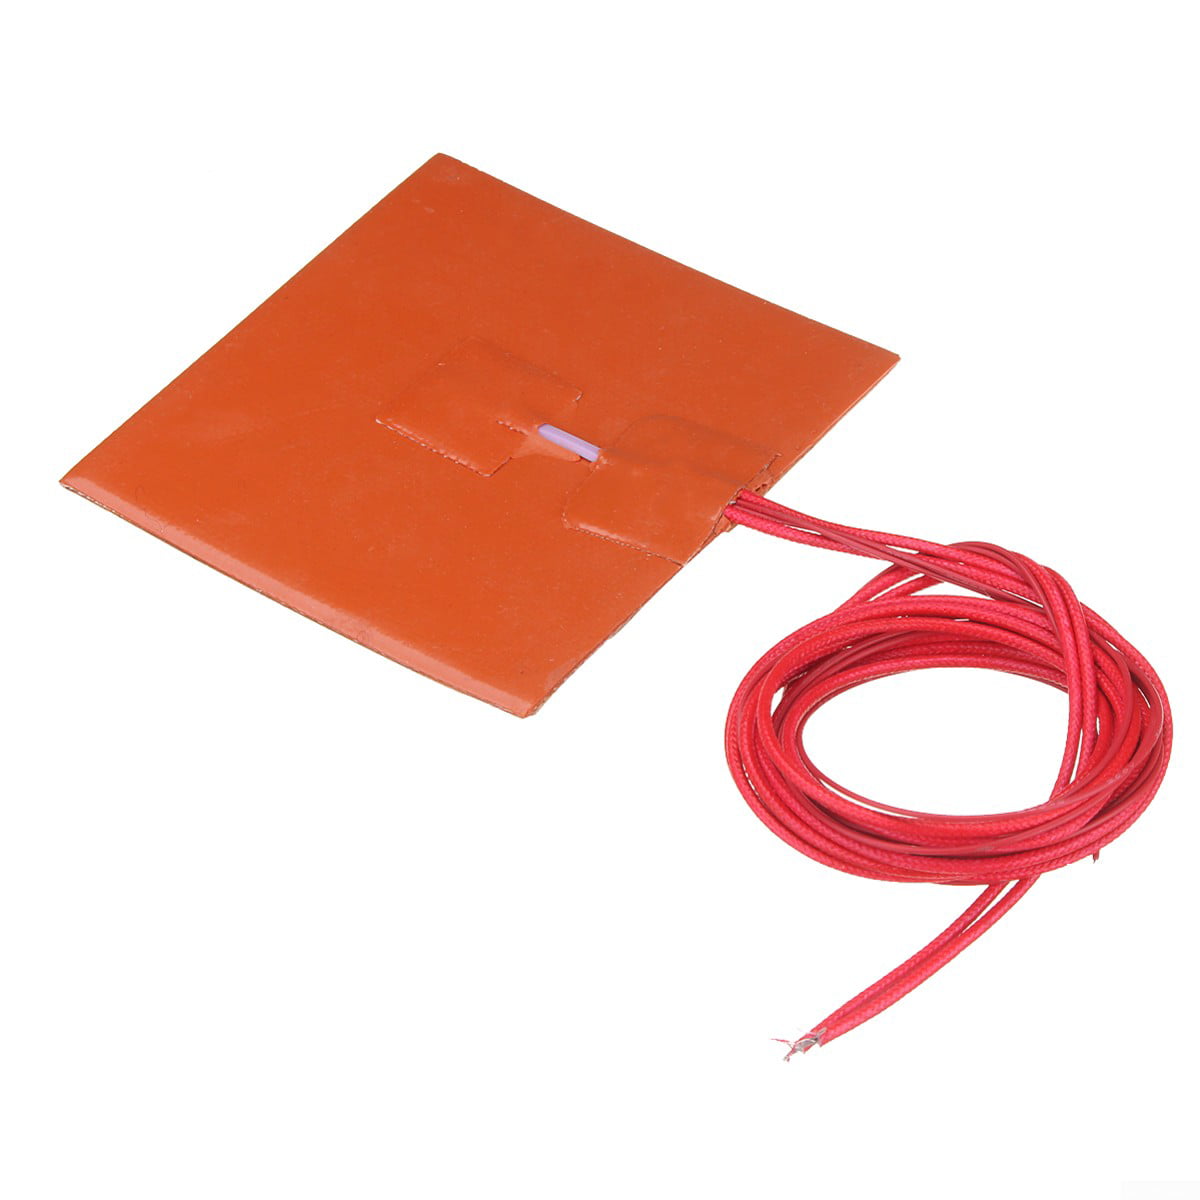 12V 50W Silicone Heating Pad Thermistor For 3D Printer System Flexible Orange 